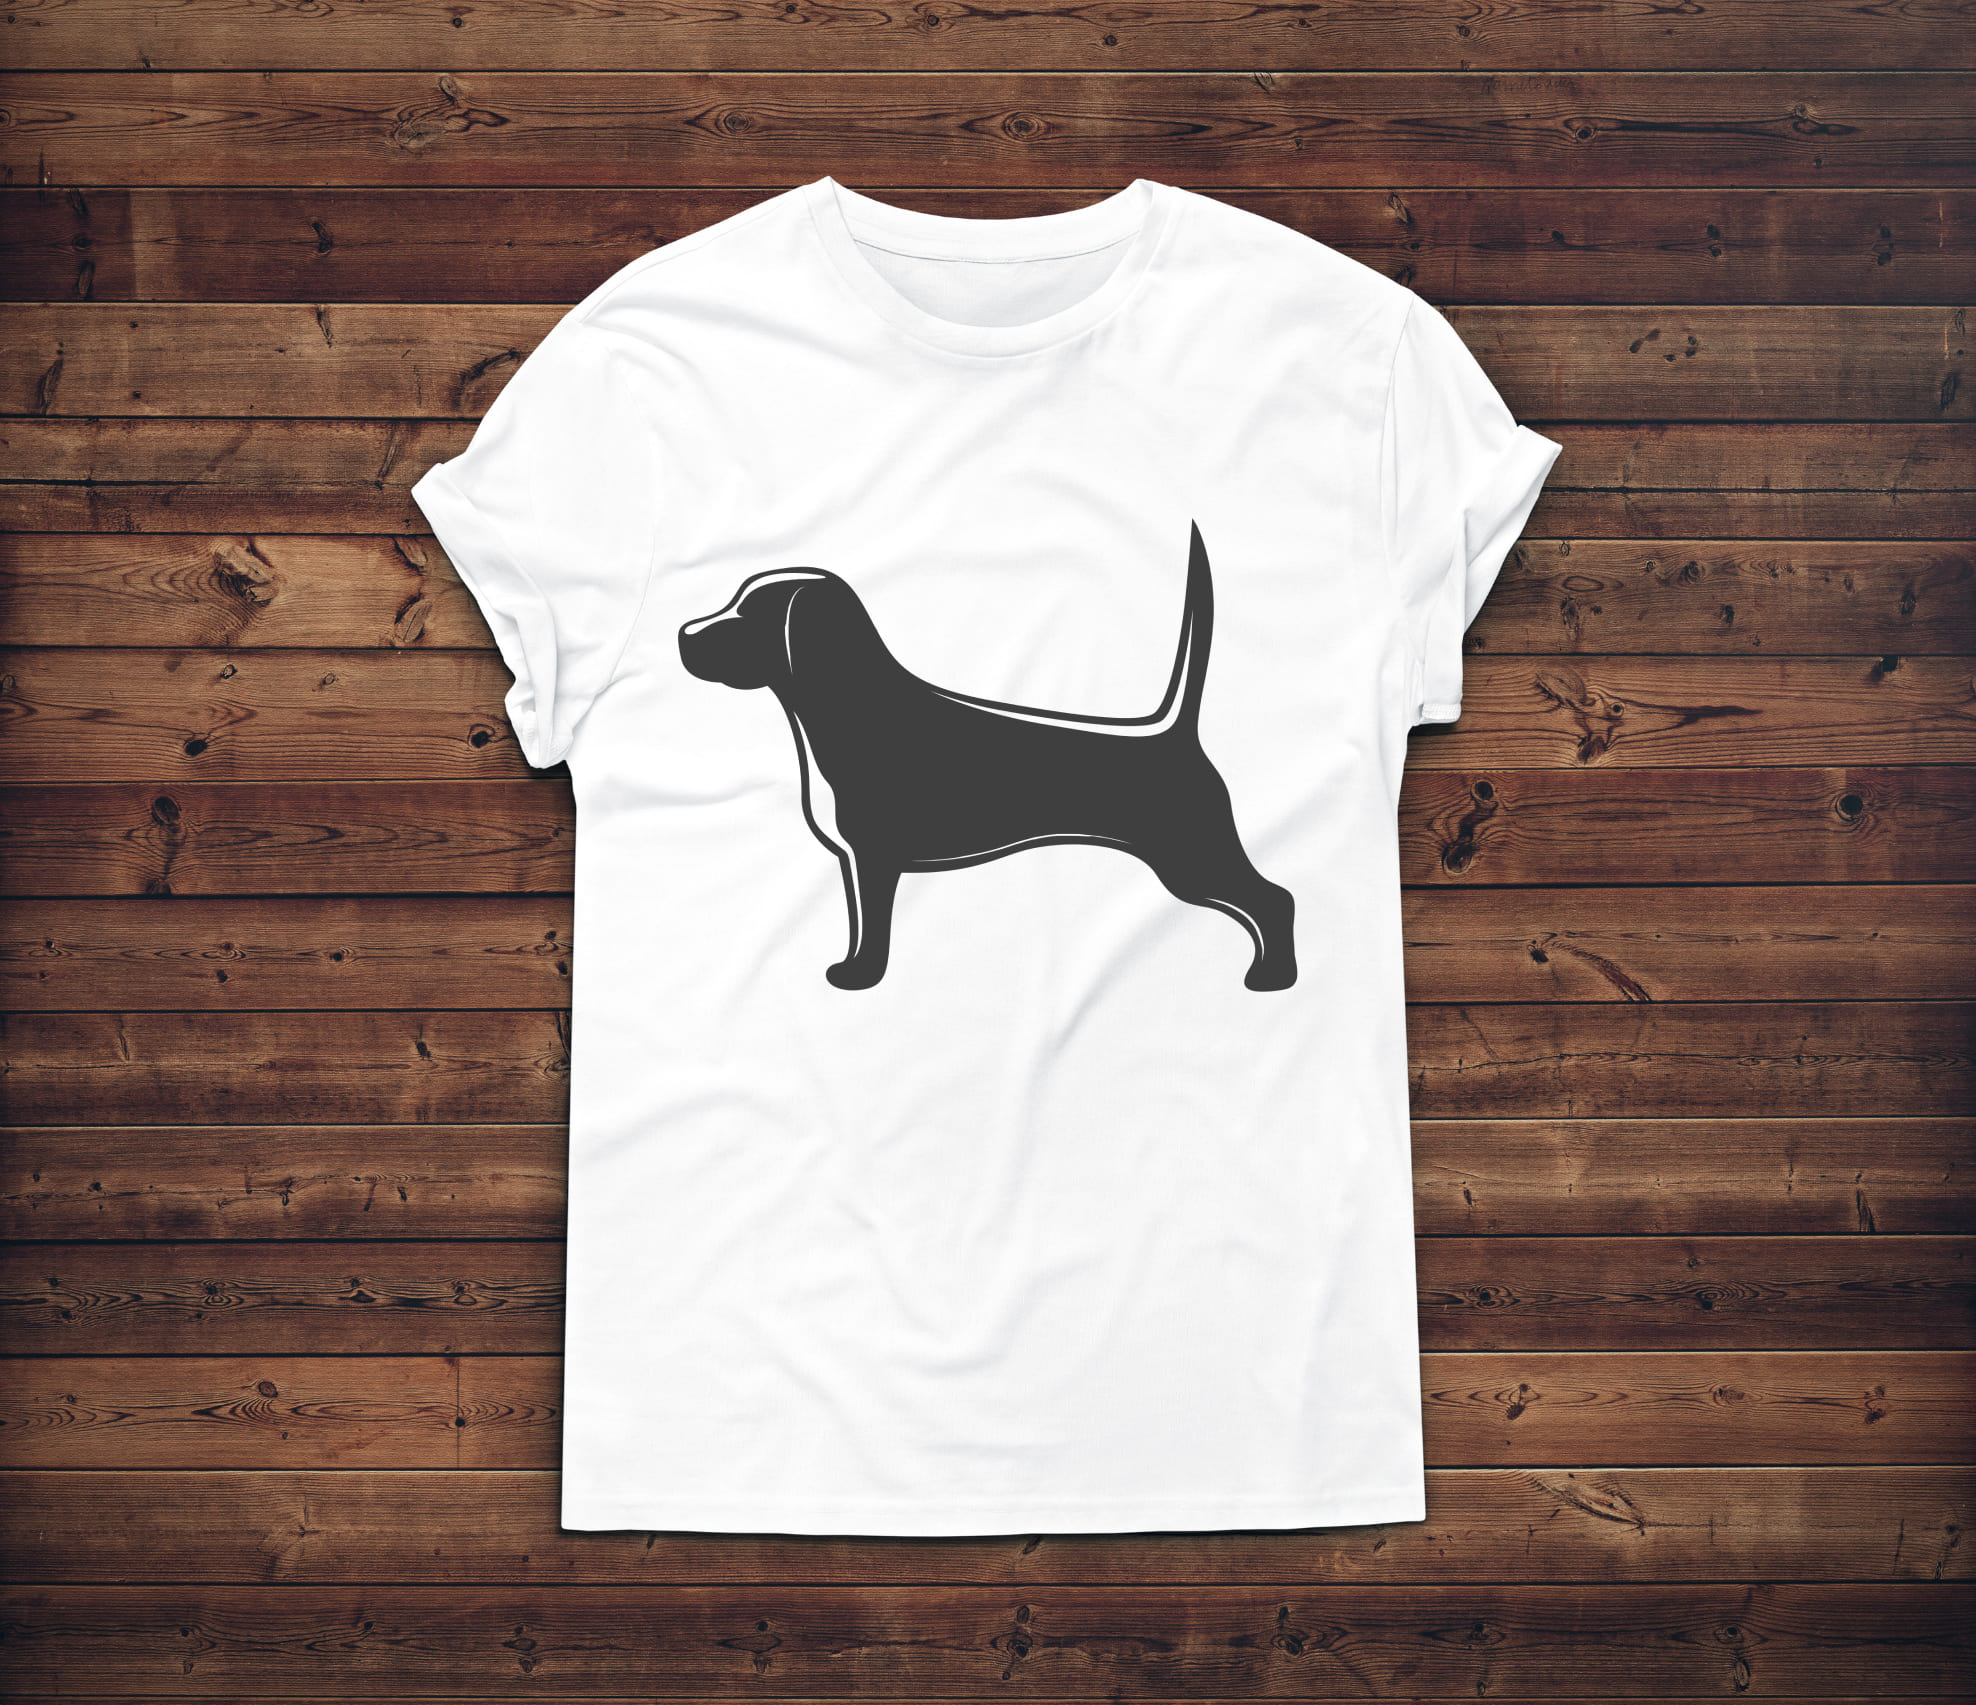 Image of a white t-shirt with a unique print of a silhouette of a hunting dog.